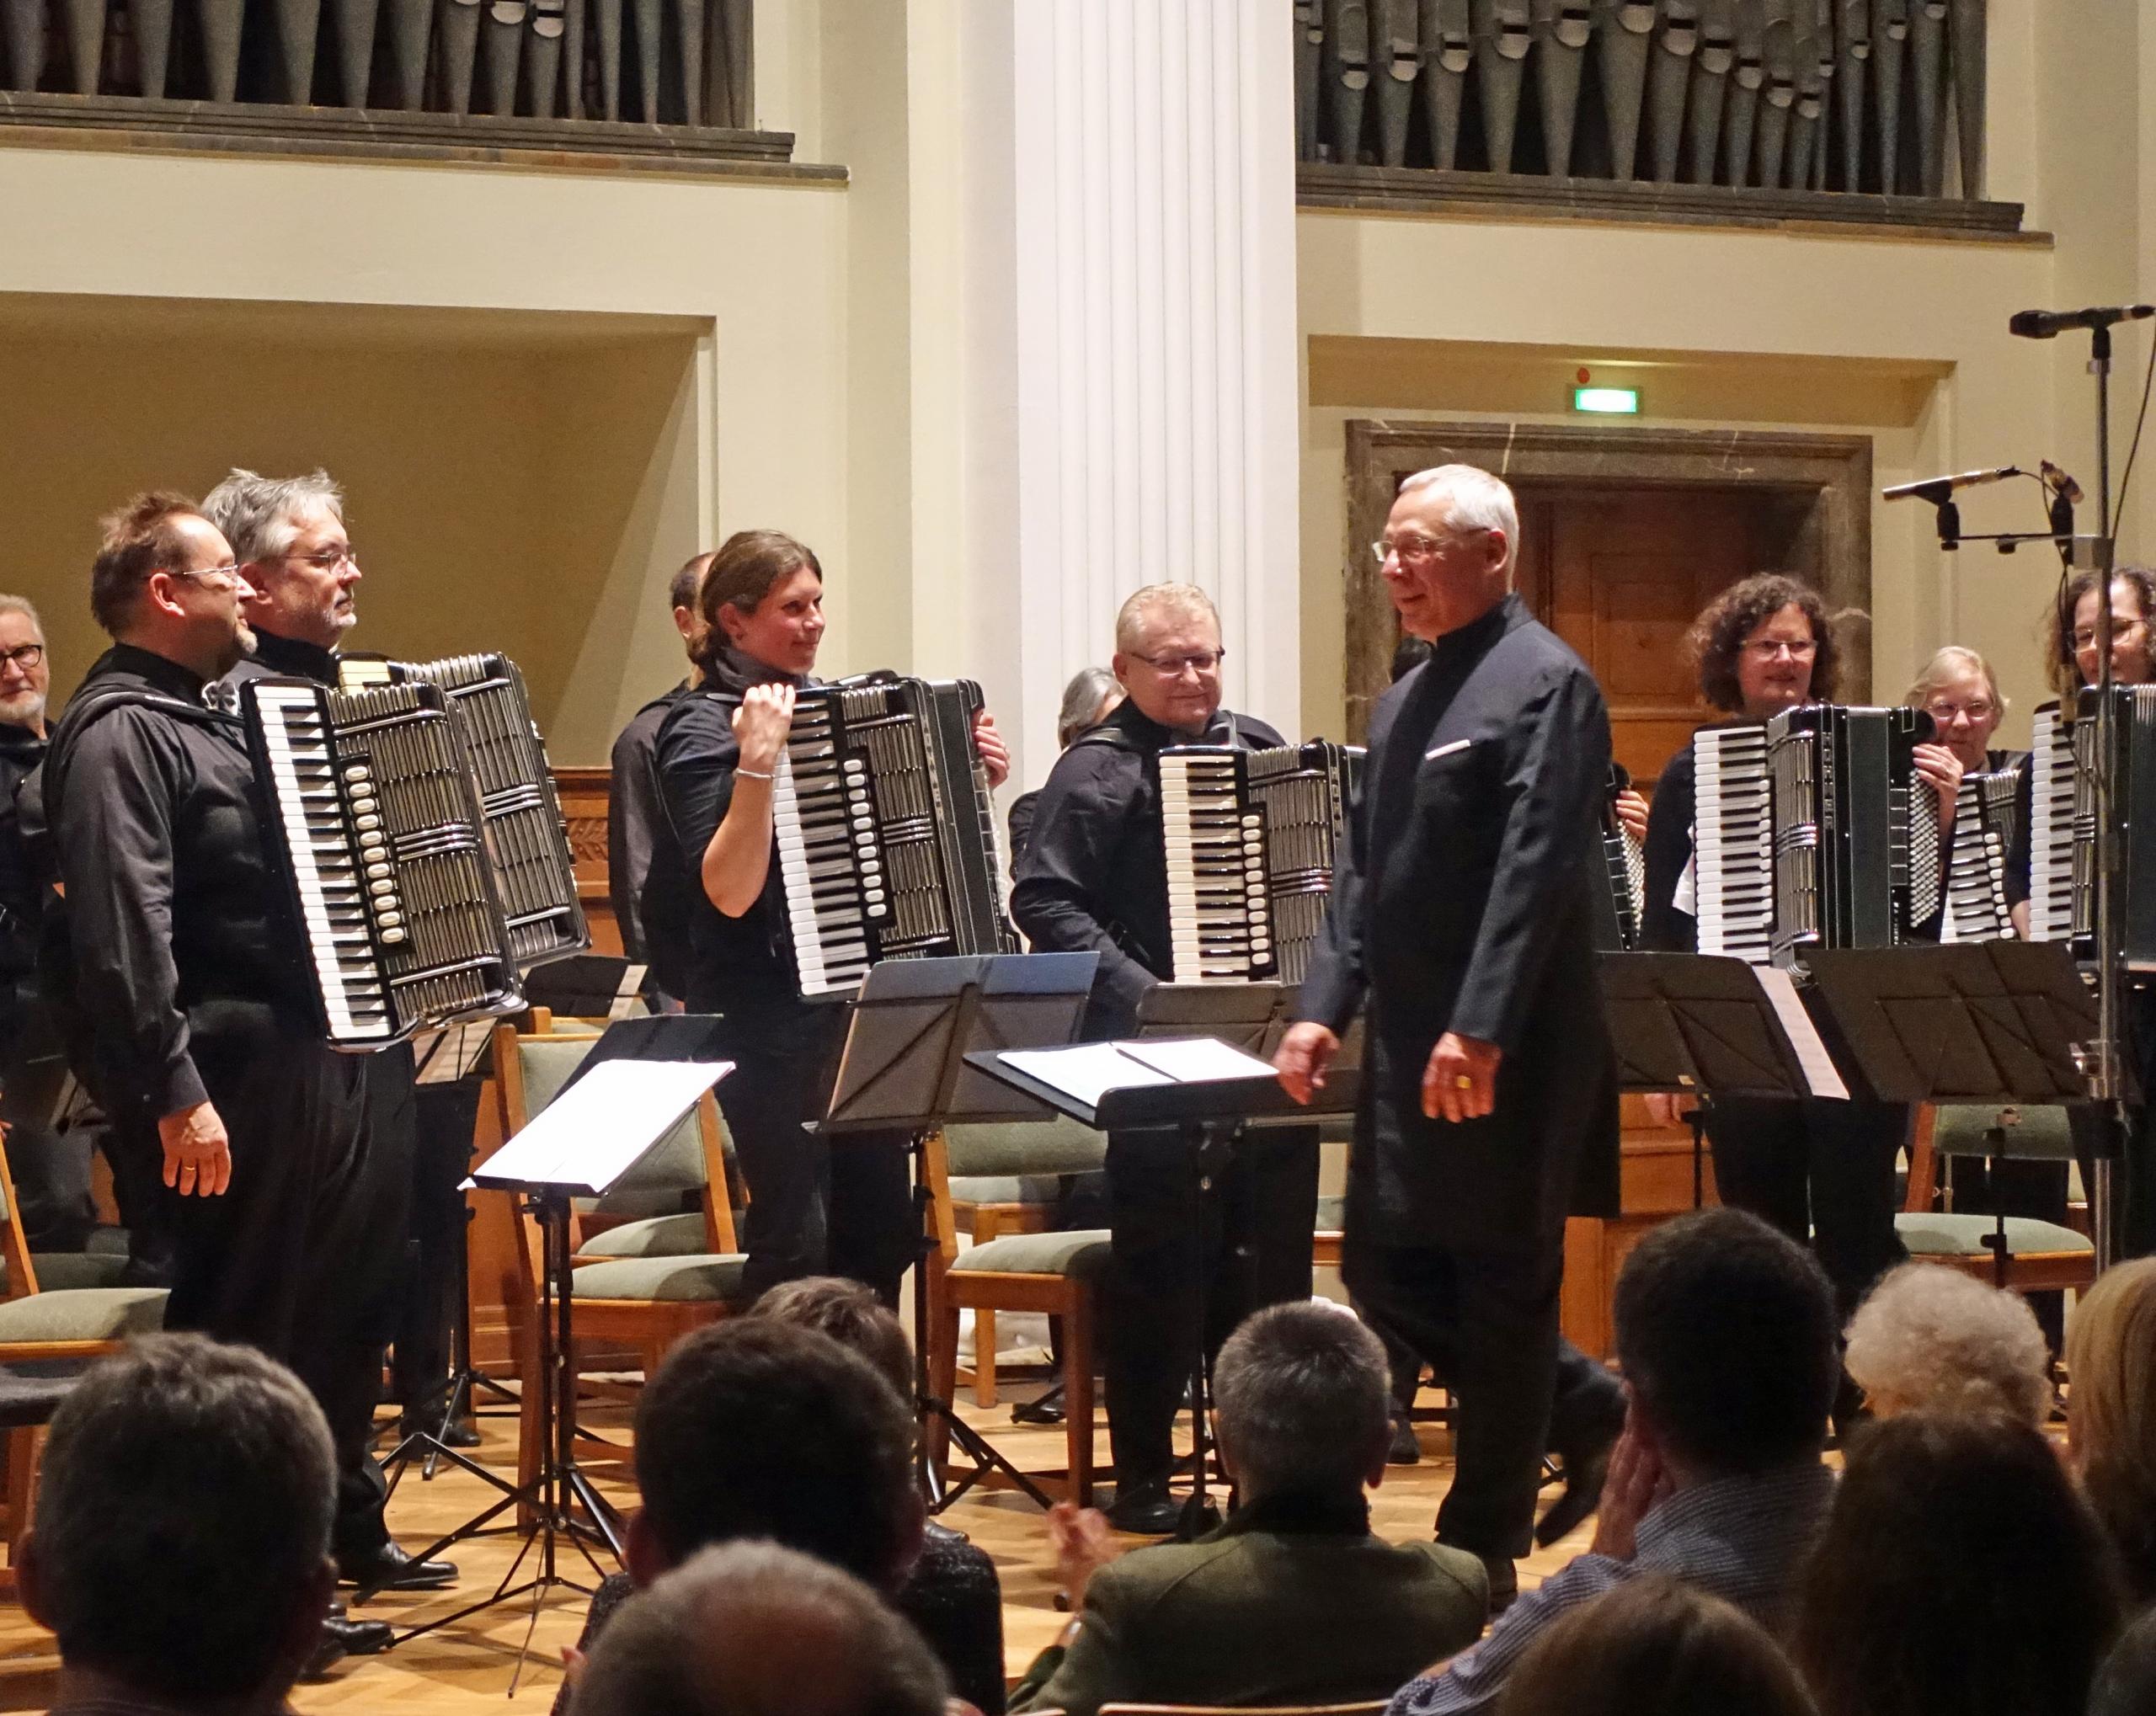 The accordion orchestra is seen during a concert applause. The musicians are standing behind their music stands, their accordions in their hands. In front of them you can see their conductor.